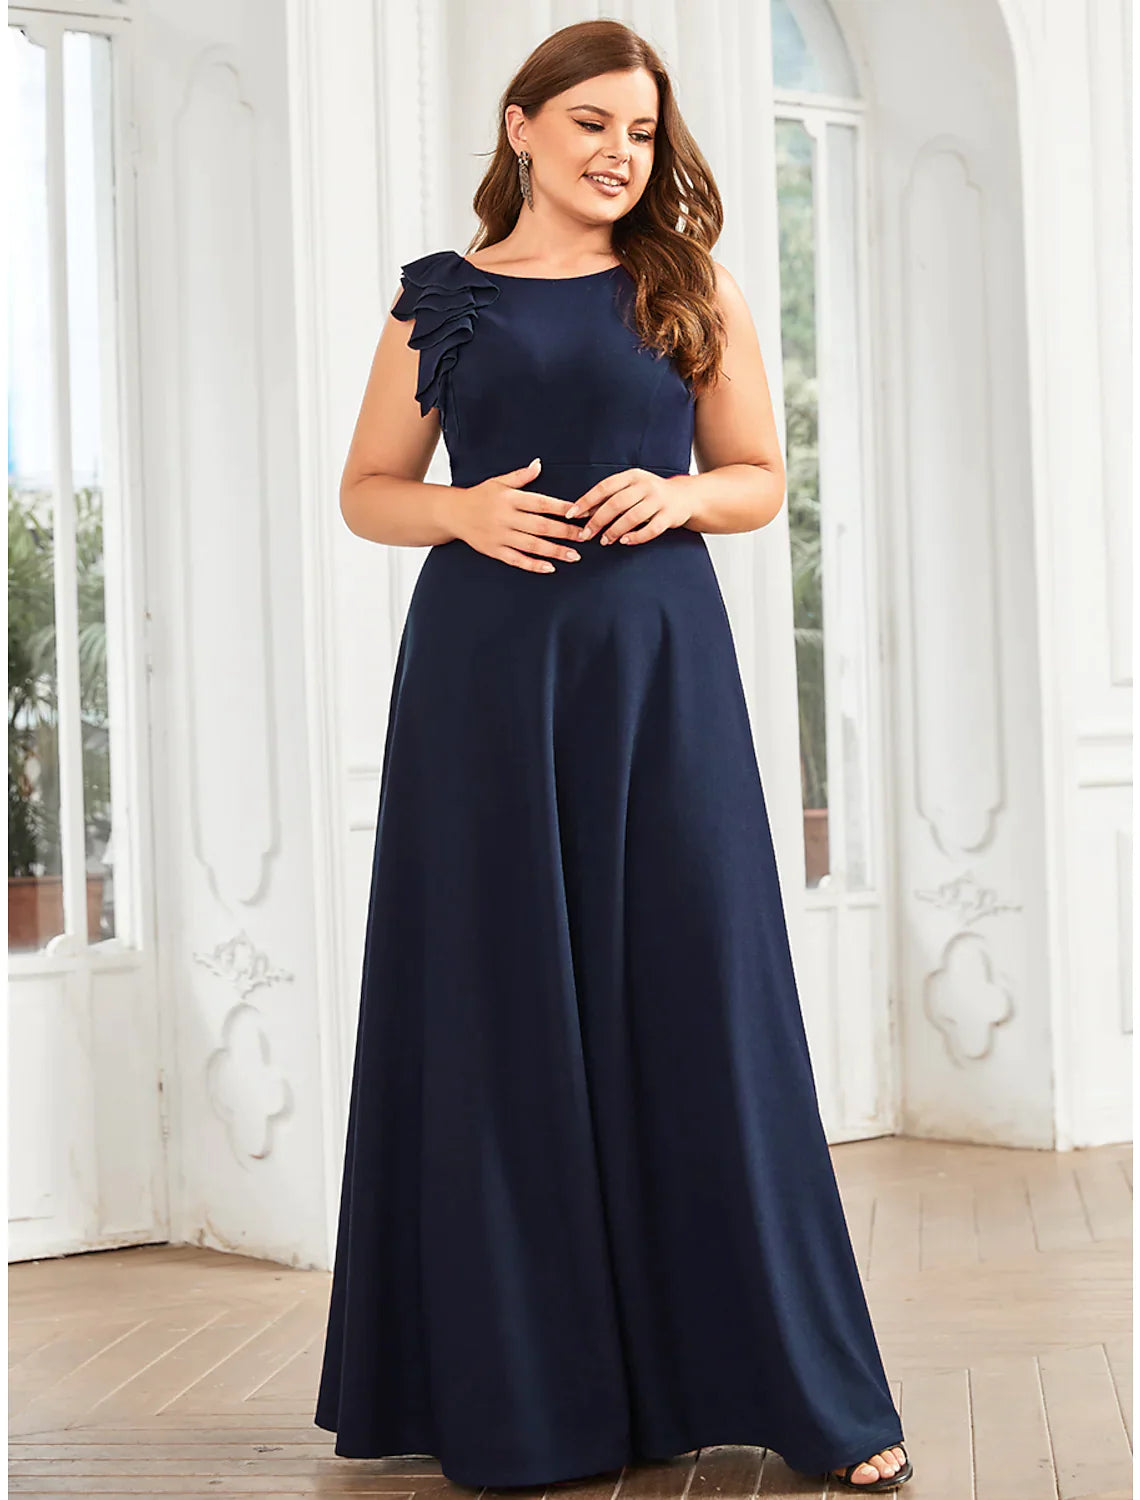 A-Line Evening Gown Plus Size Dress Formal Floor Length Sleeveless with Draping Appliques